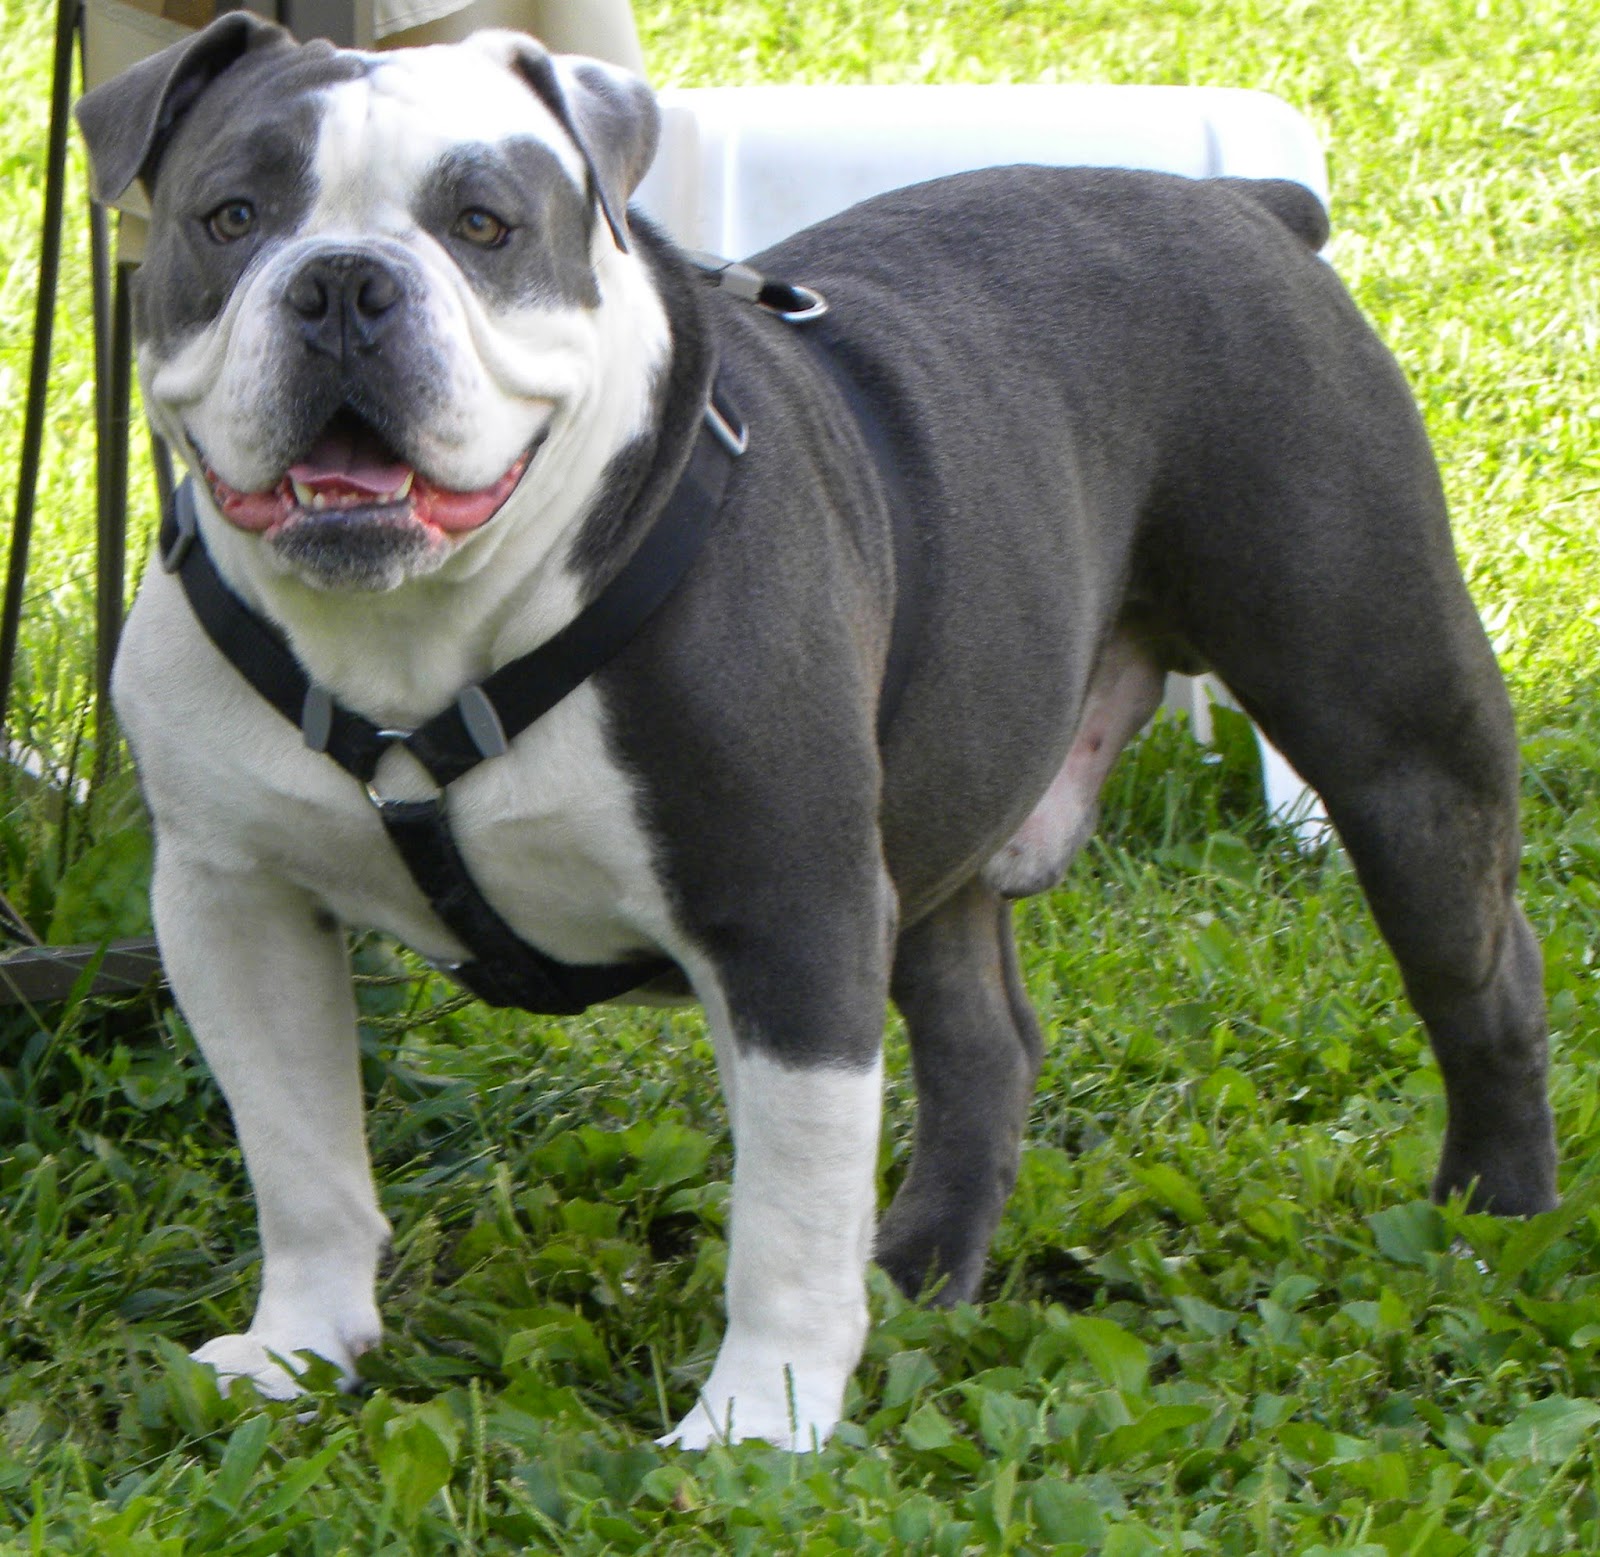 Nika's Dog Blog: 15 Bulldog Breeds You Didn't Know About